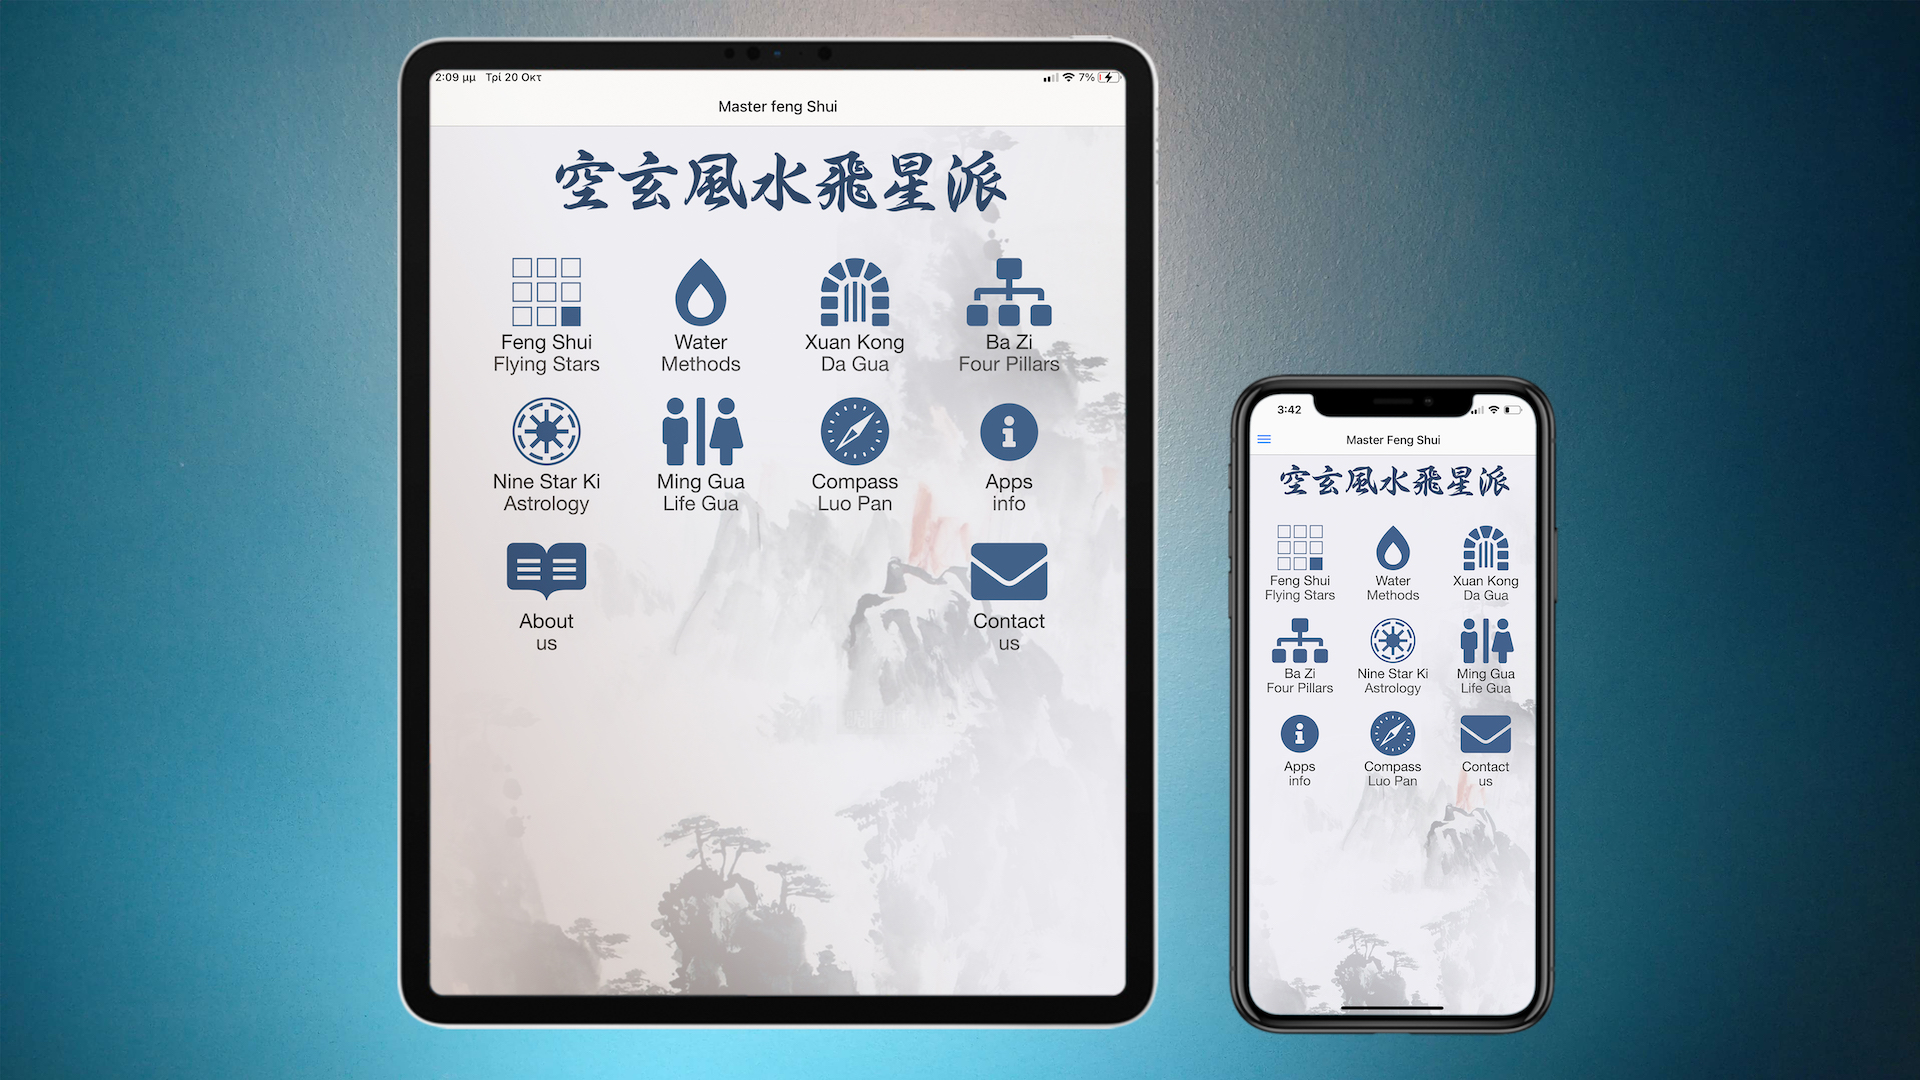 Master Feng Shui App for iOS Devices